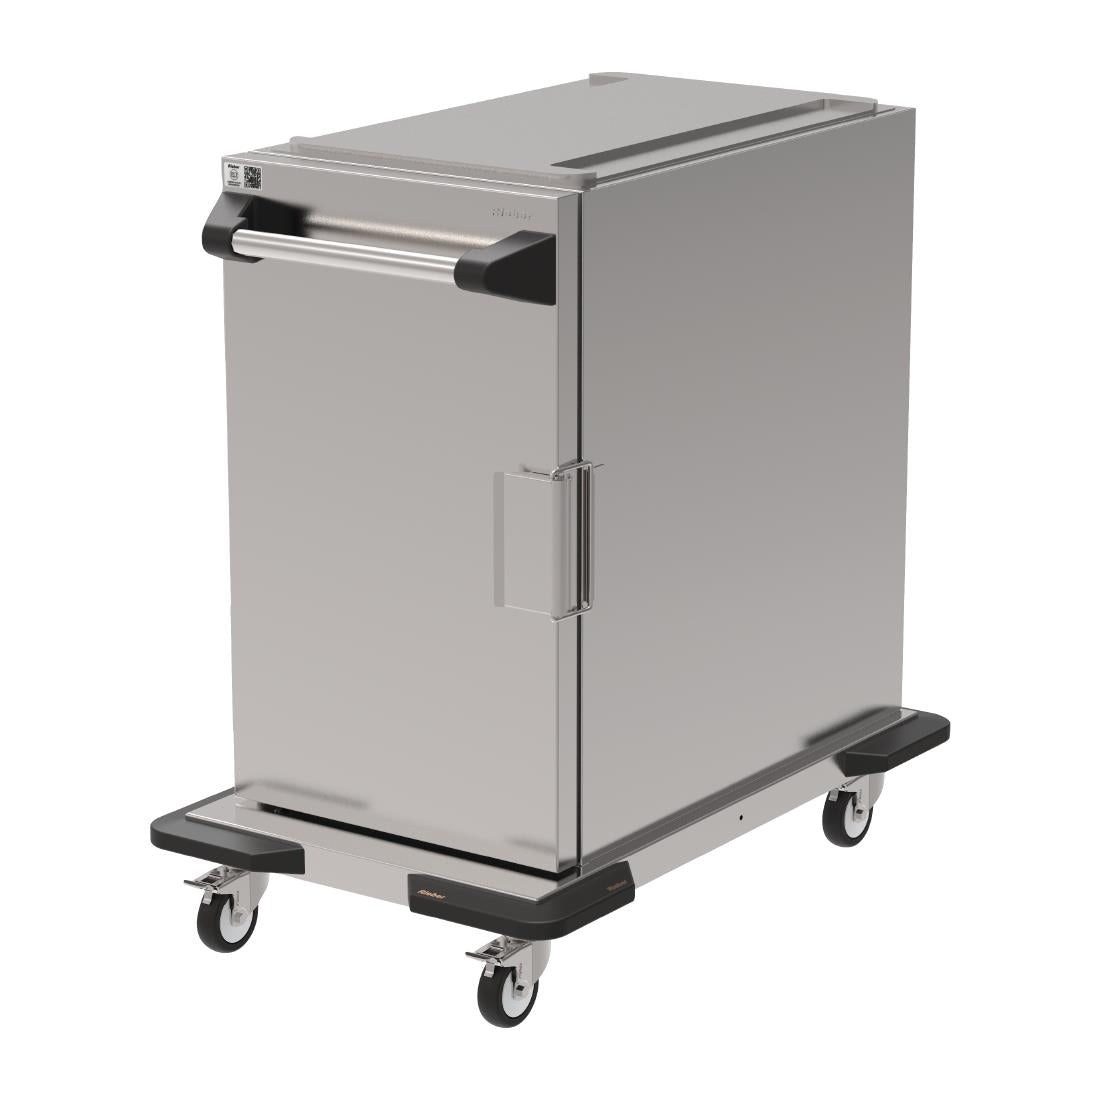 FS475 Reiber Insulated Food Transport Trolley Stainless Steel JD Catering Equipment Solutions Ltd